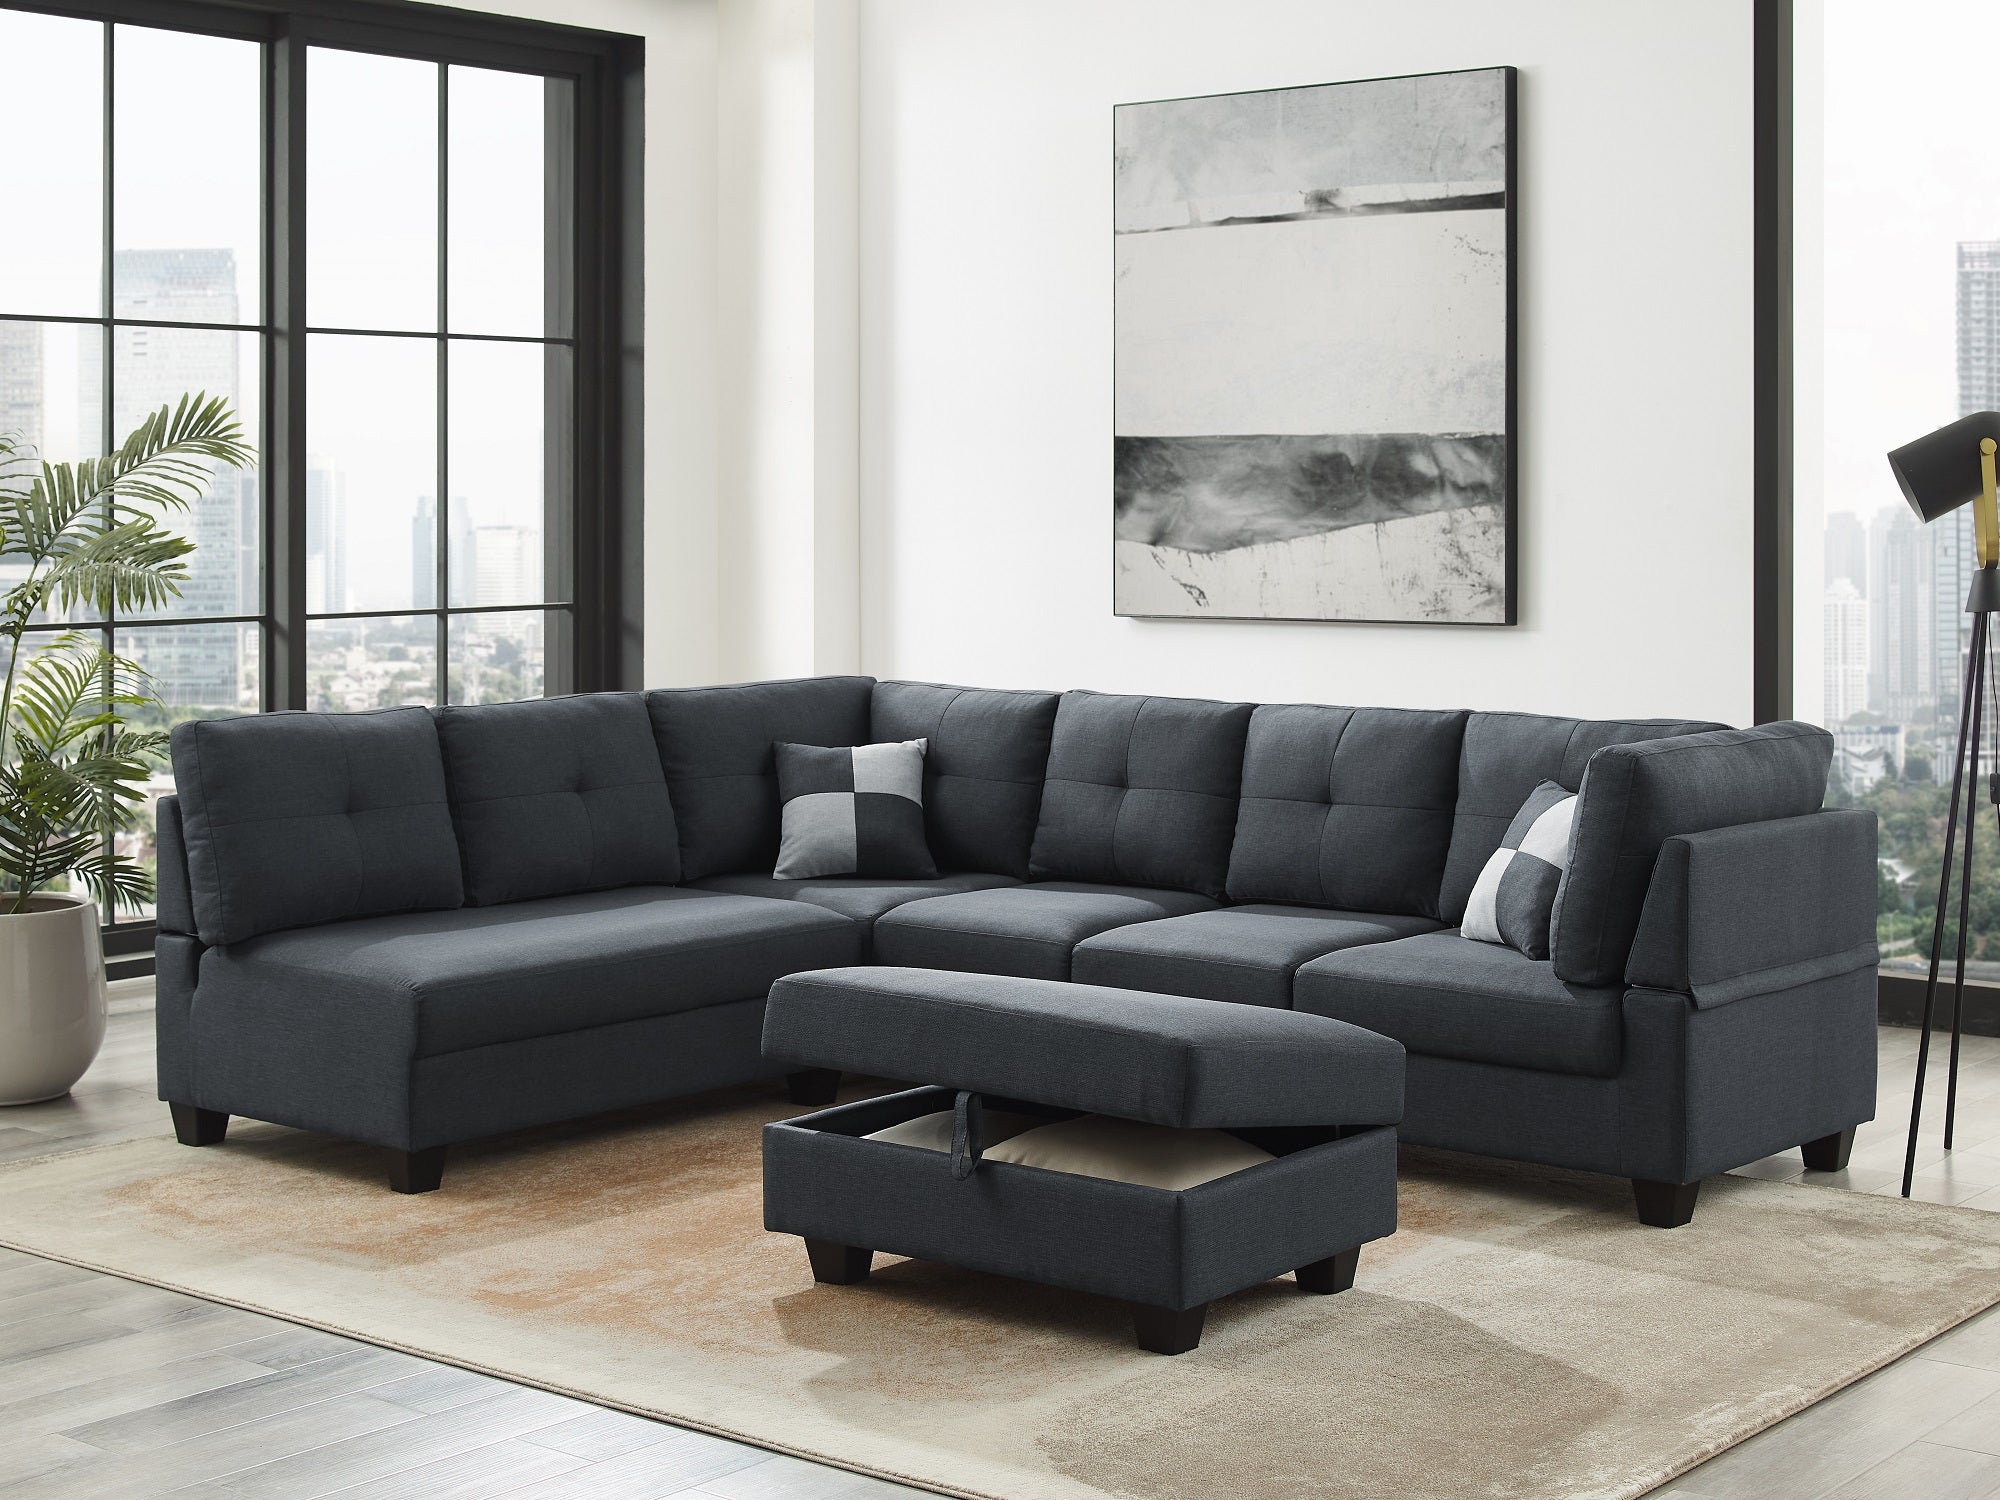 Reversible Chaise Sofas: Double the Comfort, Double the Choice!